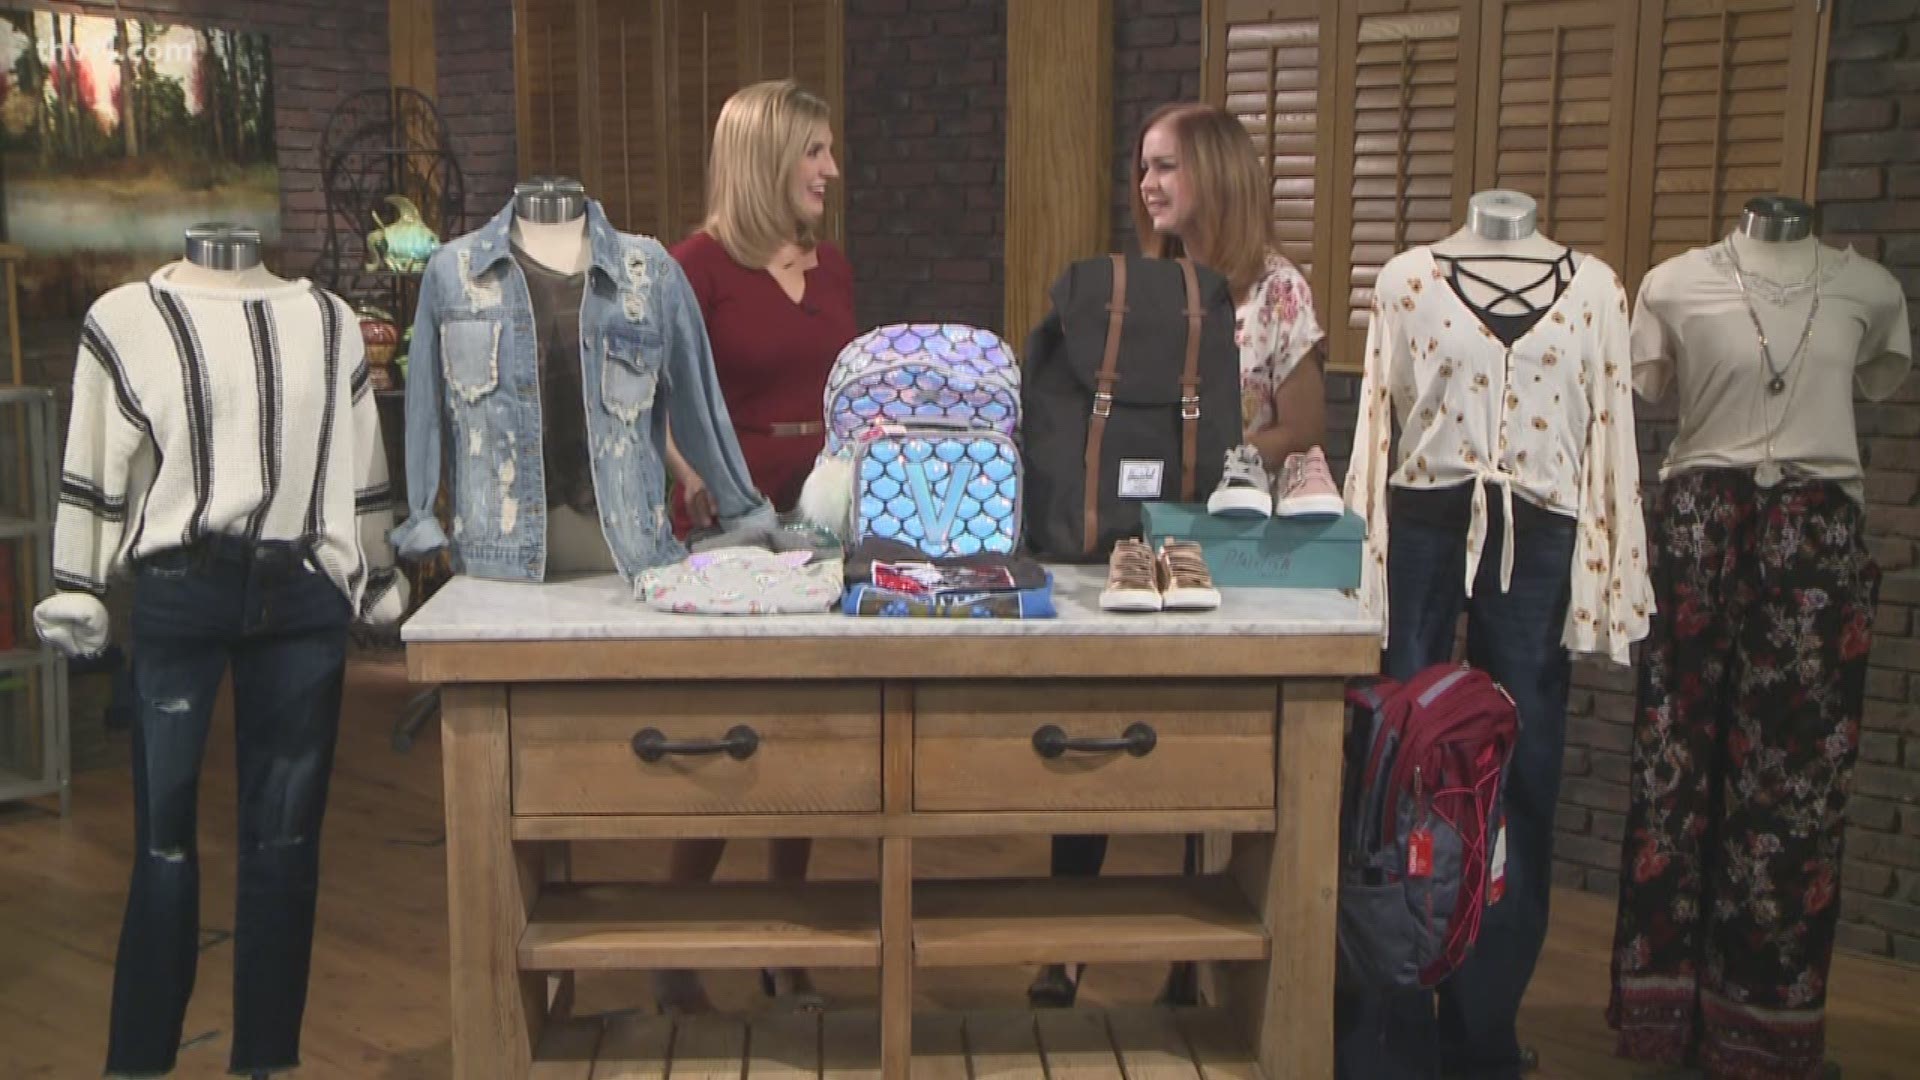 Alicia Easley shows us some of this year's back-to-school fashions.